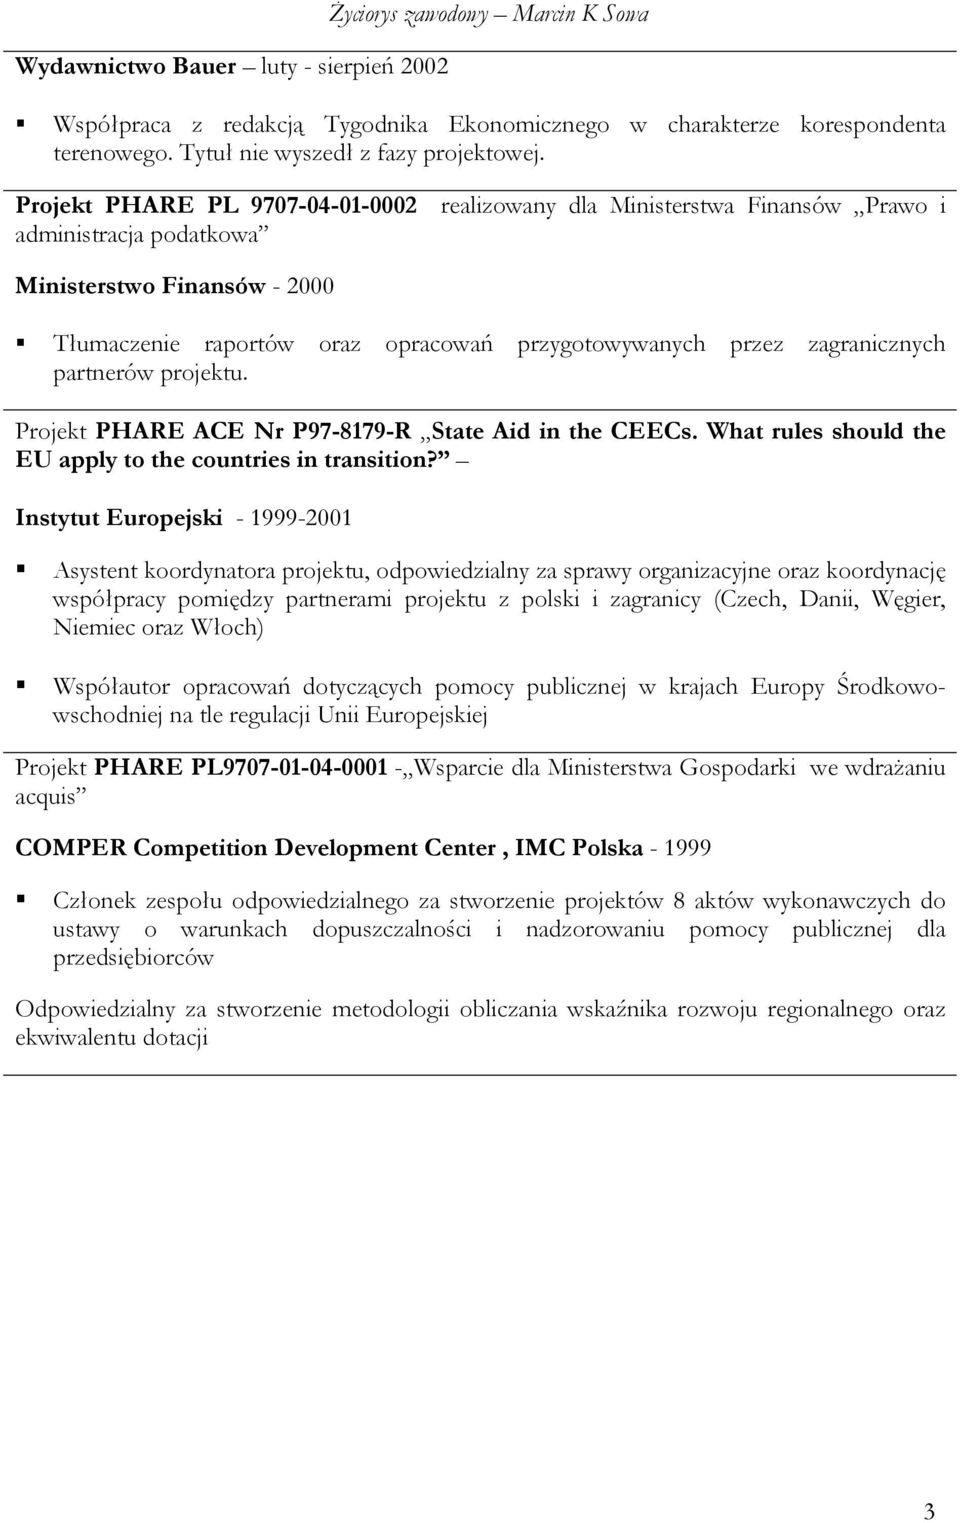 zagranicznych partnerów projektu. Projekt PHARE ACE Nr P97-8179-R State Aid in the CEECs. What rules should the EU apply to the countries in transition?